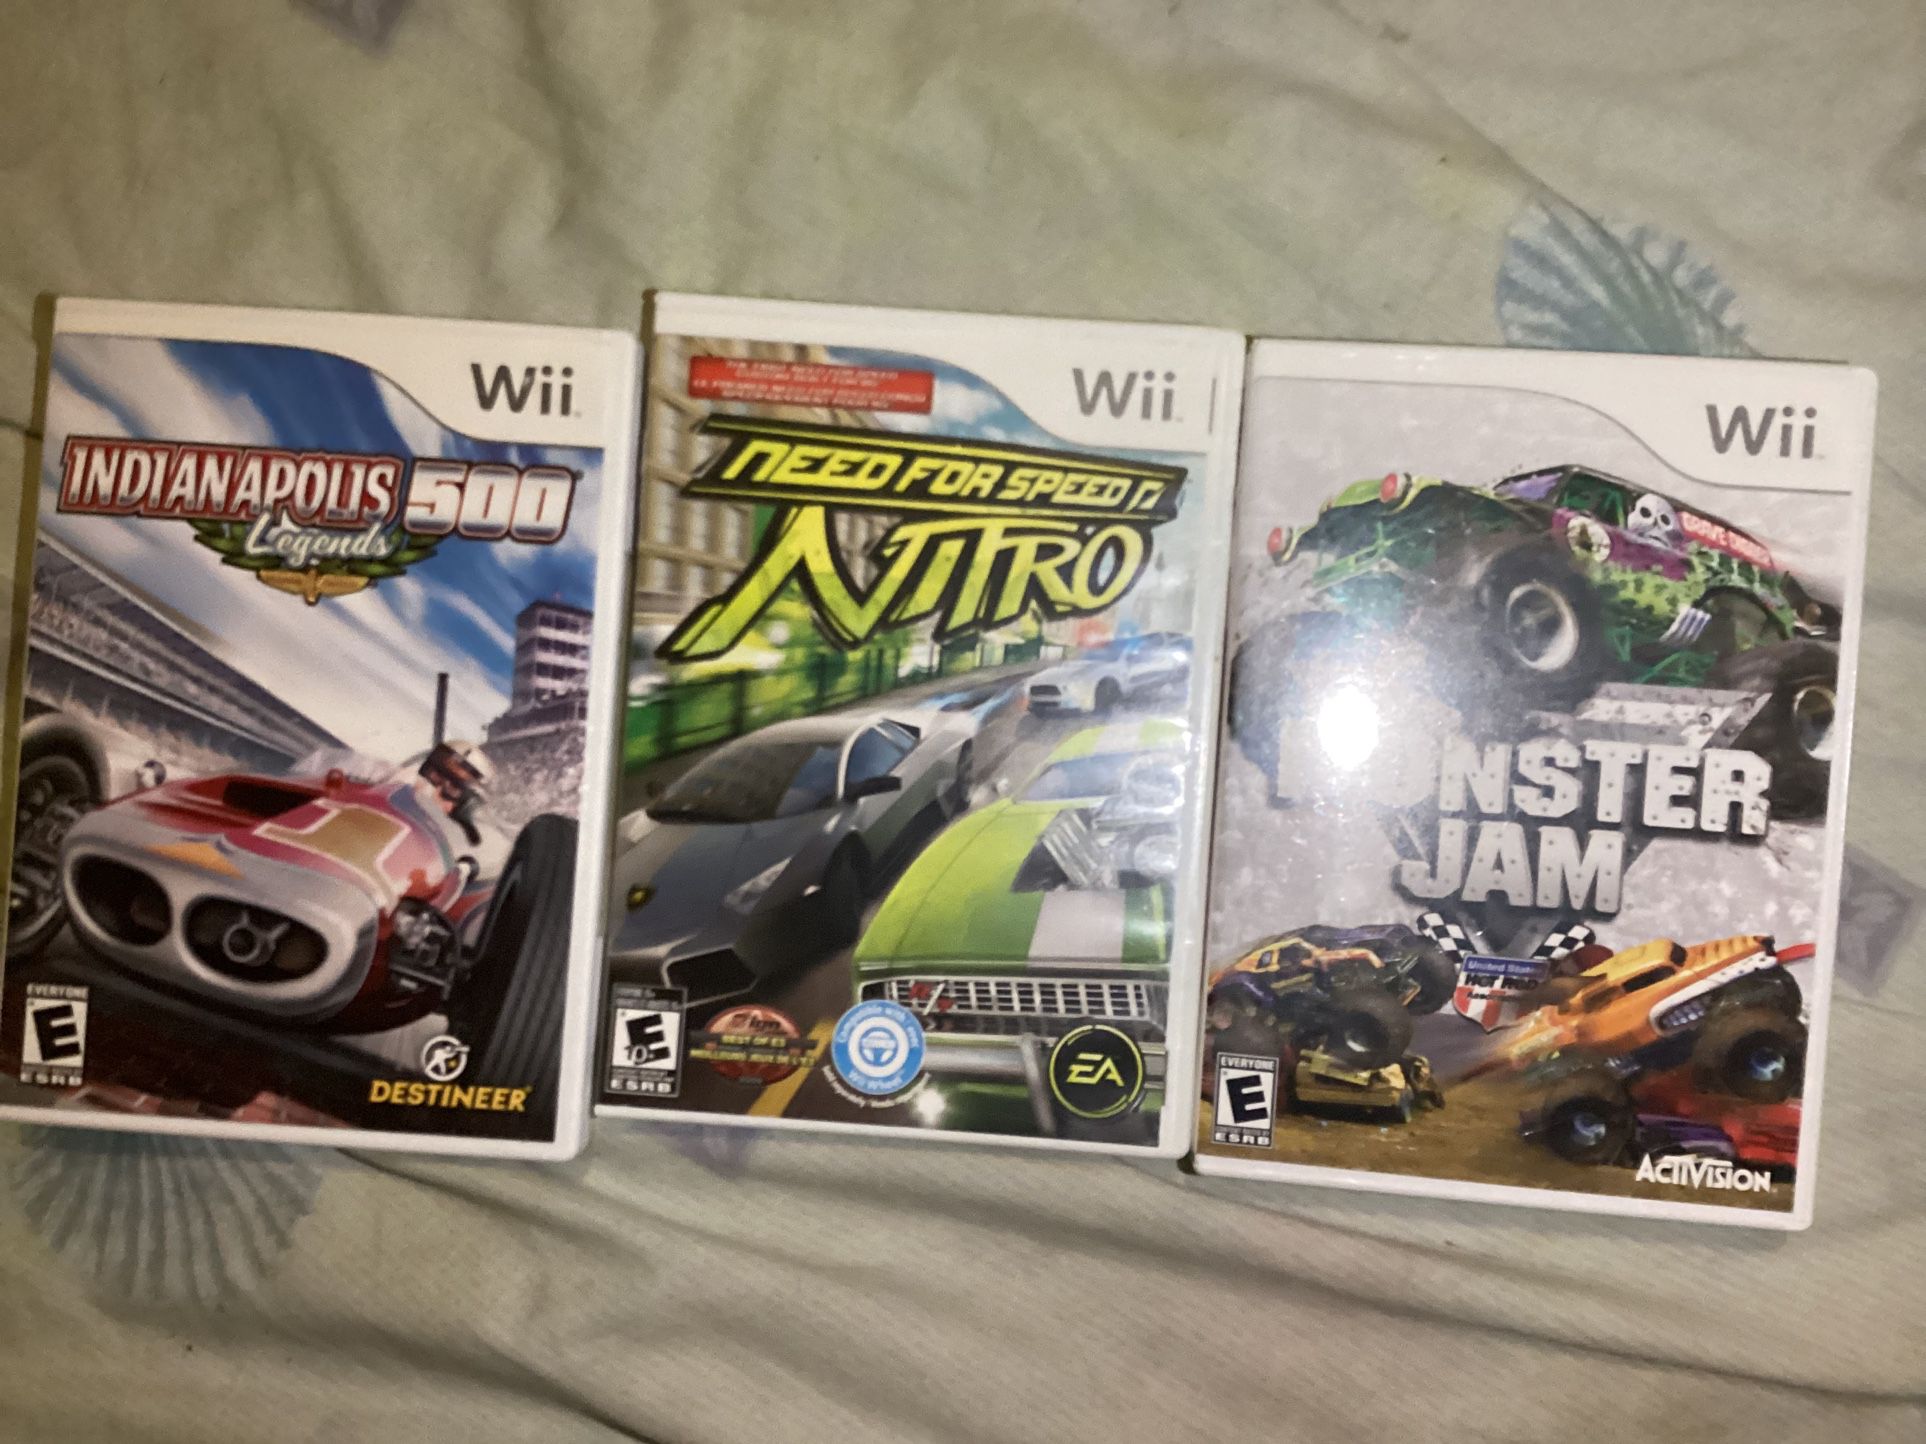 Indianapolis 500 Legends,monster jam,& need for speed nitro for Nintendo Wii